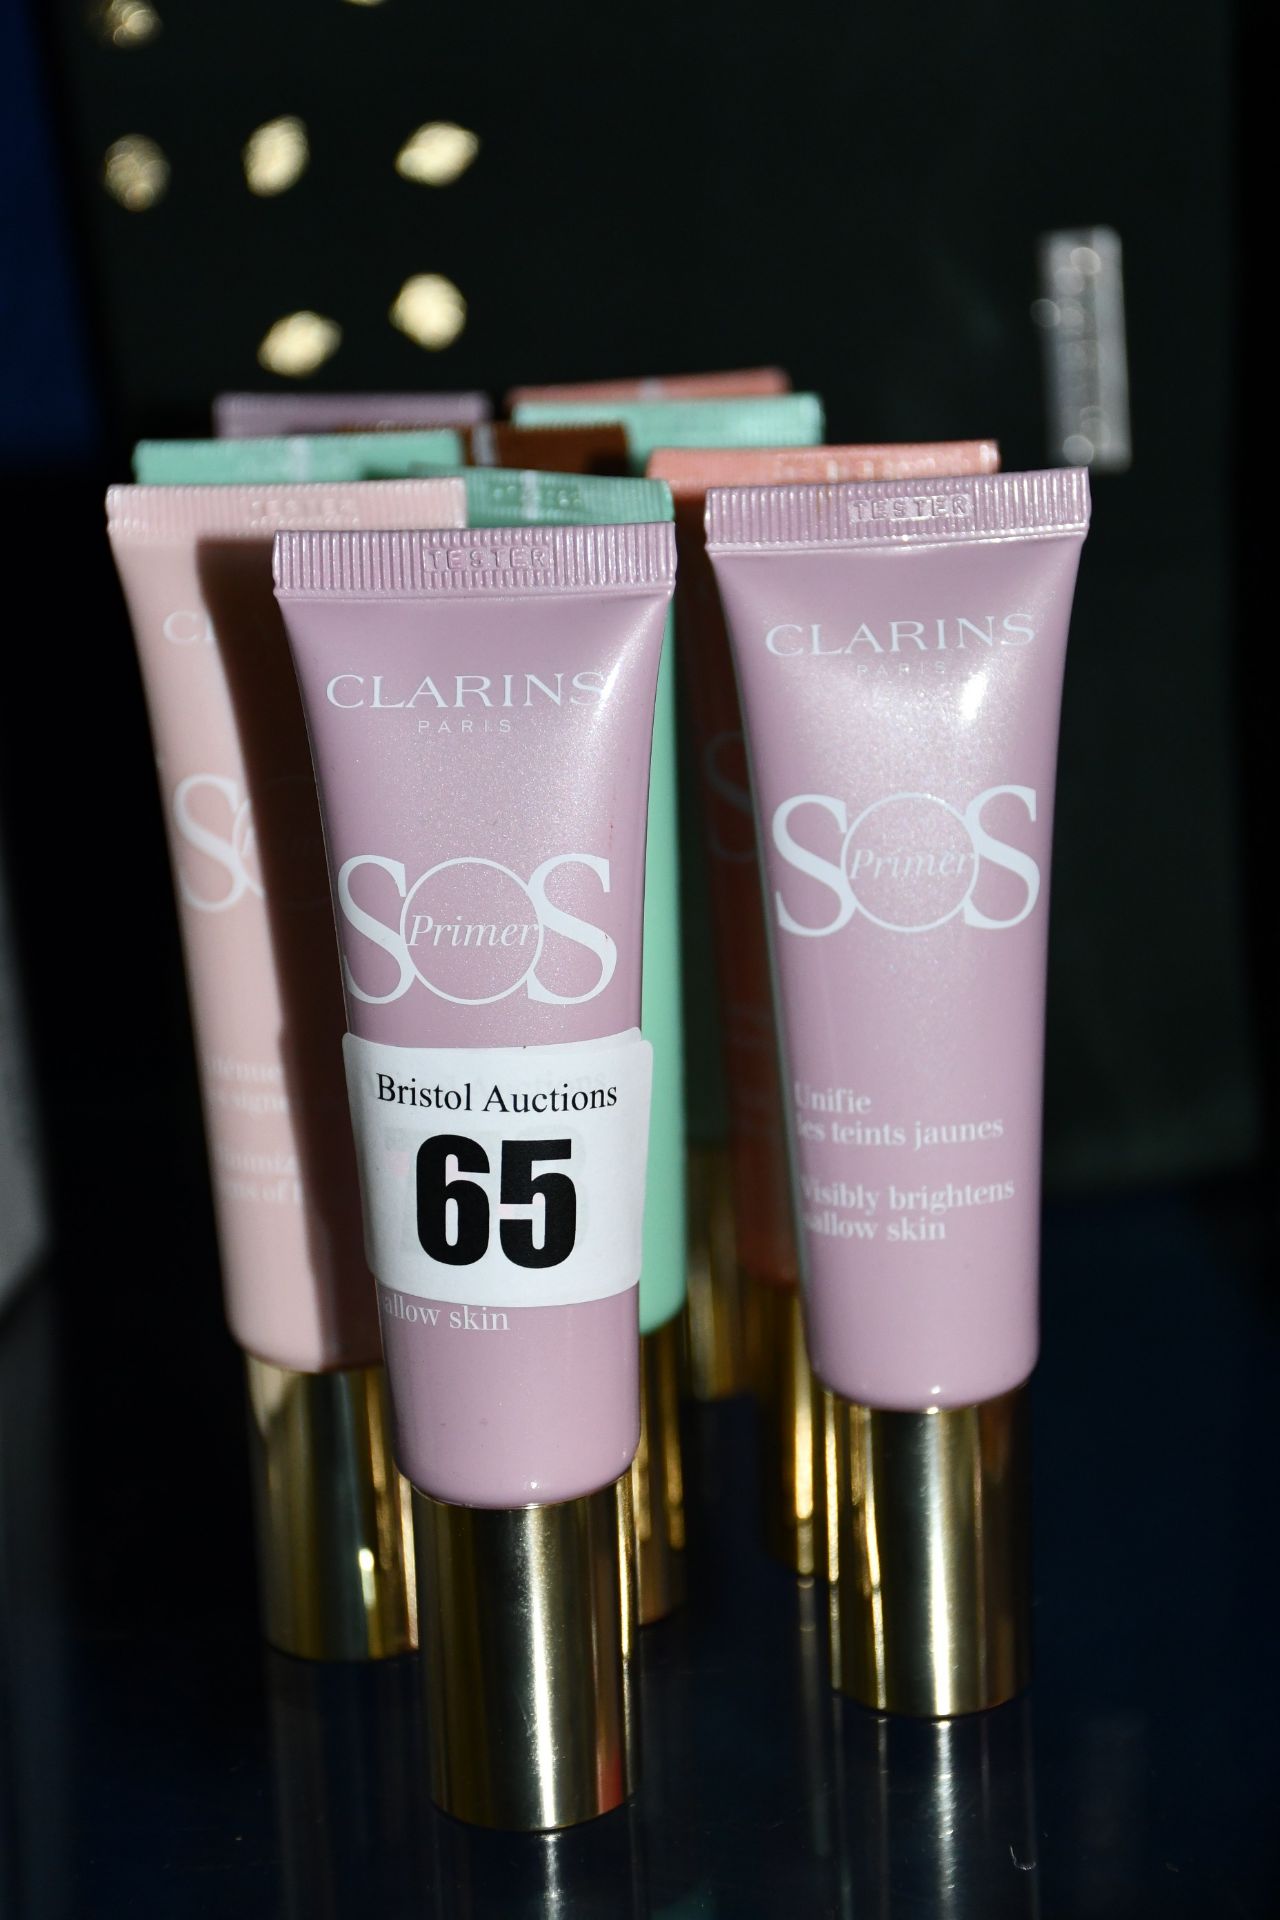 Ten assorted Clarins SOS primers together with a toiletry bag.